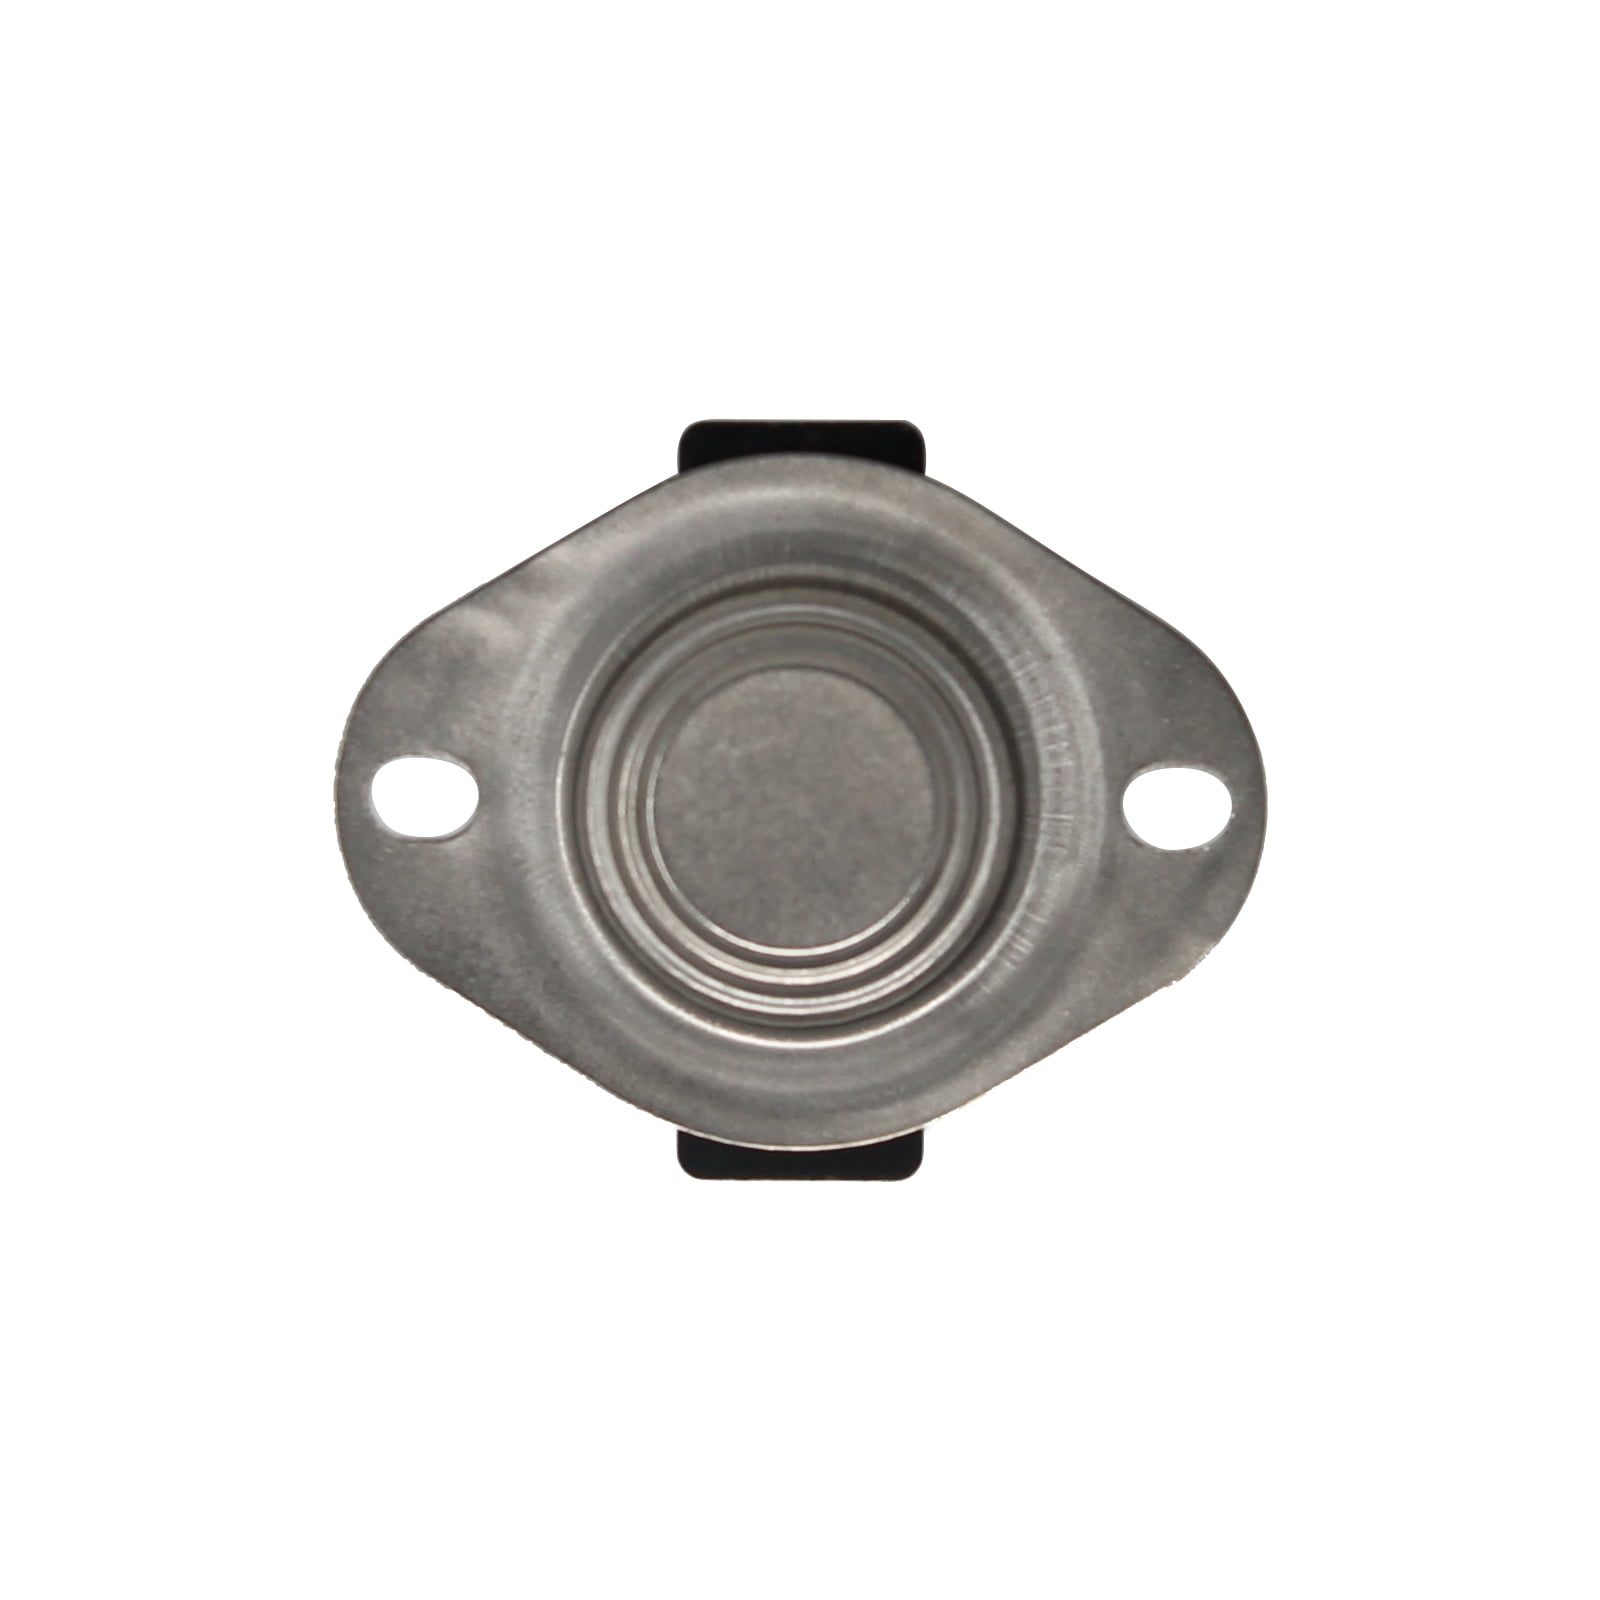 Replacement Fixed Thermostat 3387134, WP3387134, 2011, 306910